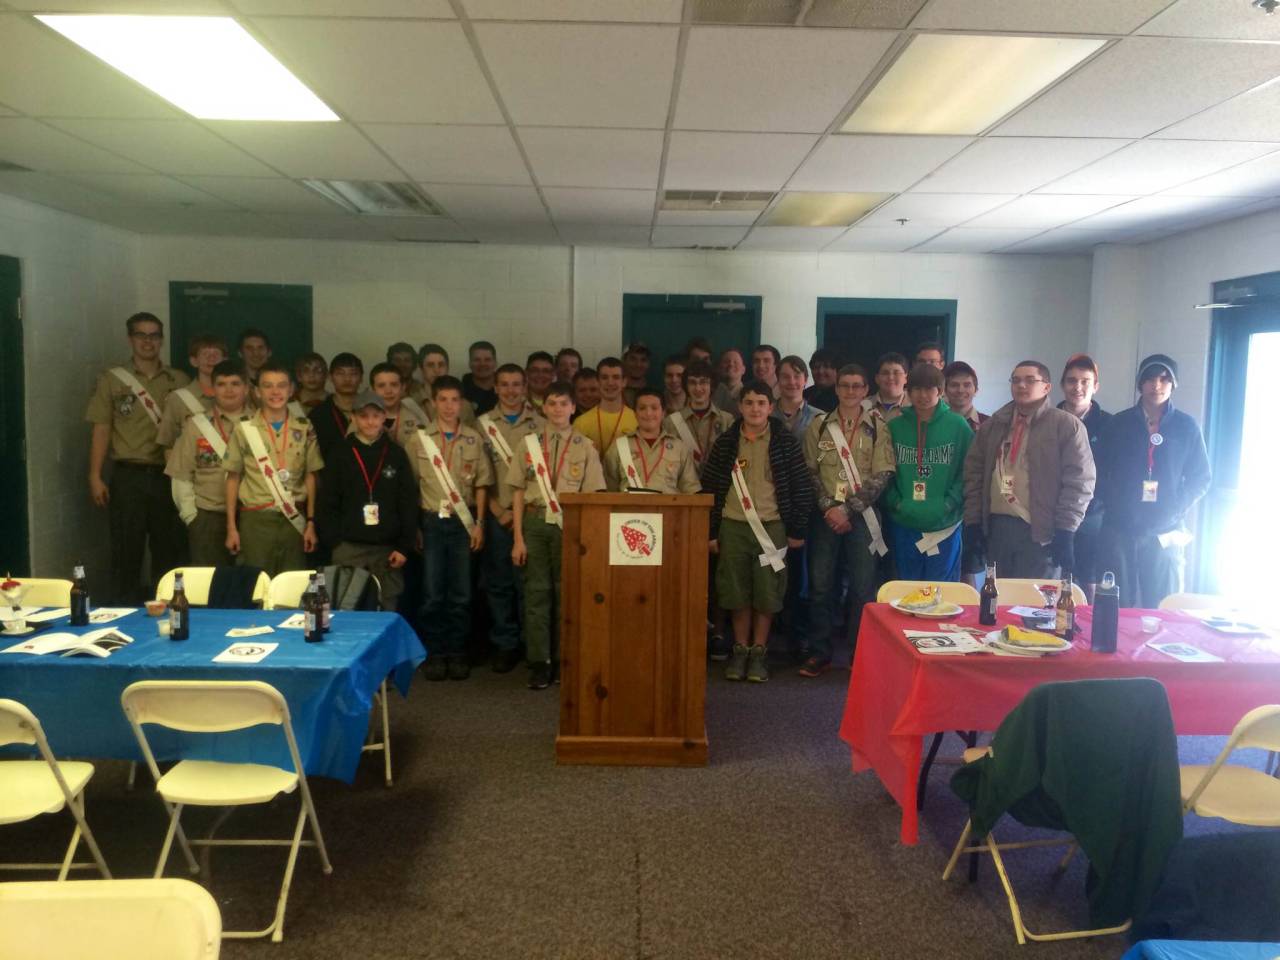 “ Shown above: VIA Luncheon attendees at C-7 Section Conclave meet 2014 Central Region Chief Ricky Angeletti for an inspirational meal.
”
While attending the C-7 Section Conclave, I had a really great opportunity to connect with my childhood dream of...